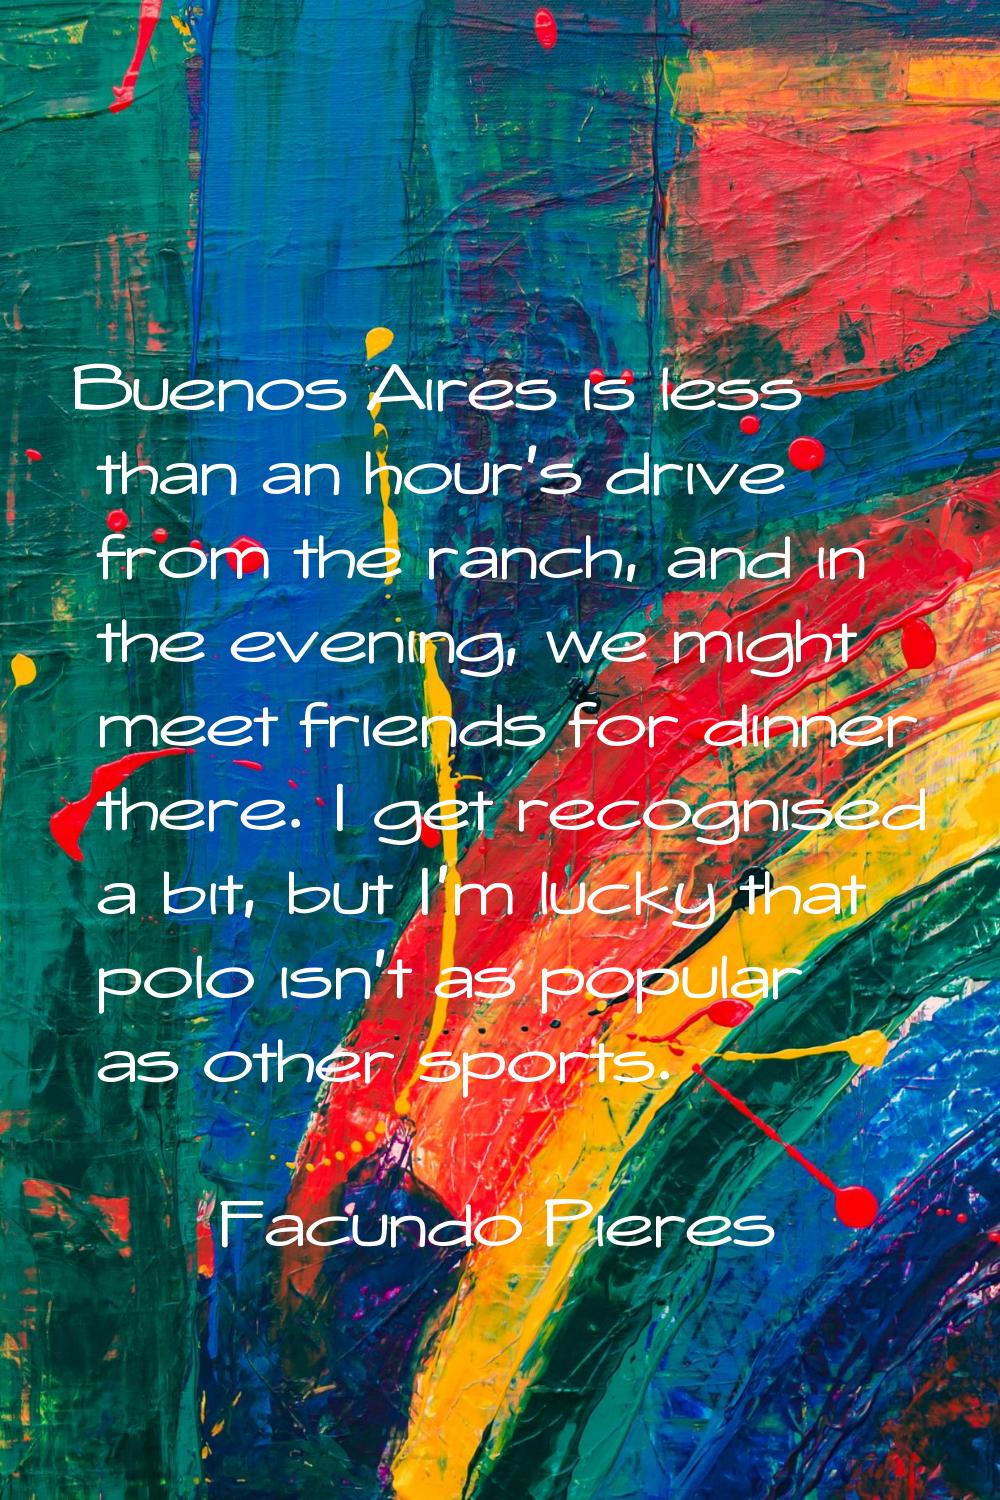 Buenos Aires is less than an hour's drive from the ranch, and in the evening, we might meet friends